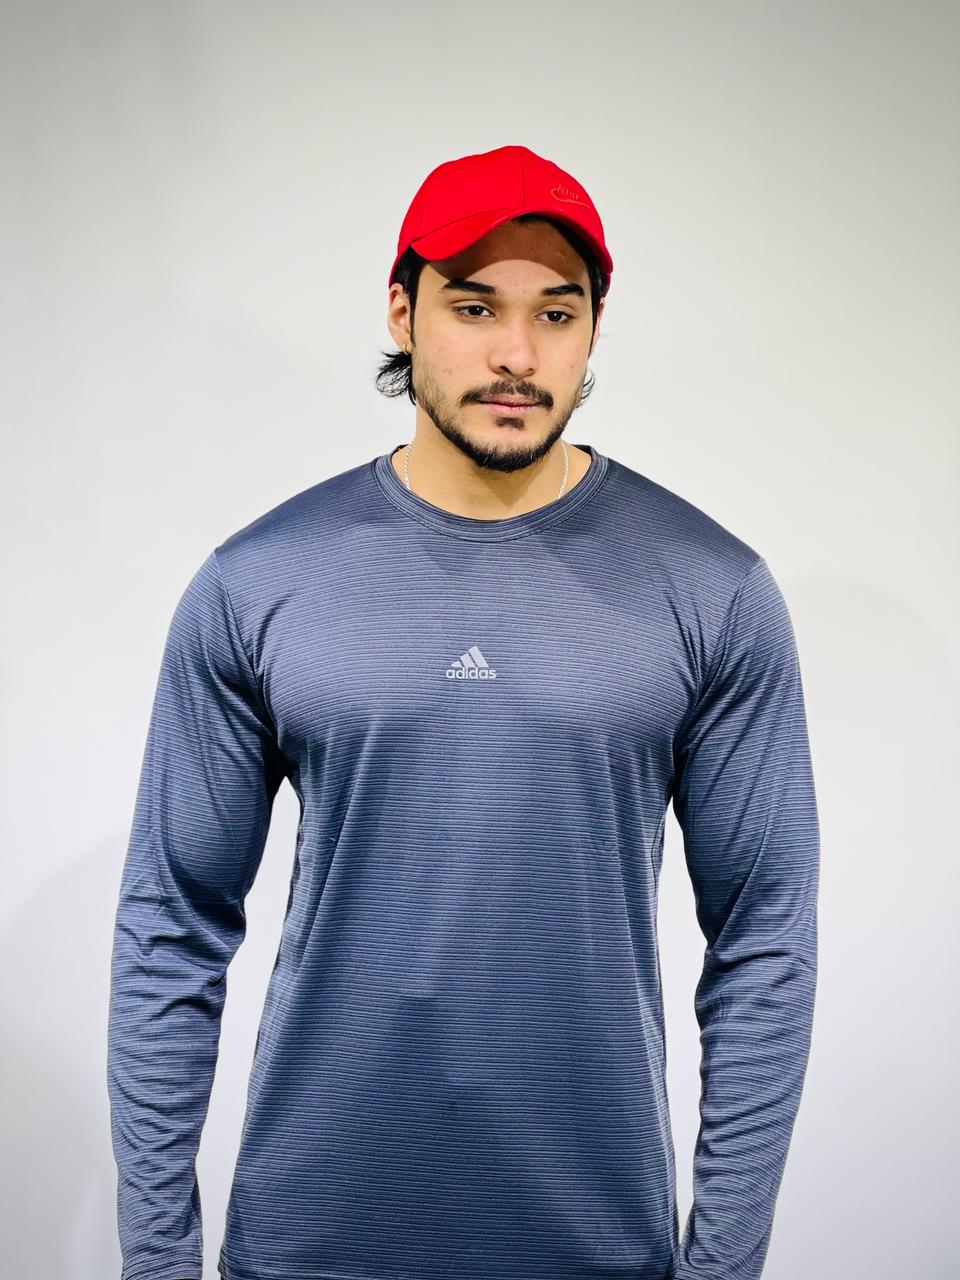 Adidas-Over size Full Sleeve Shirt In Dri-fit Stuff.